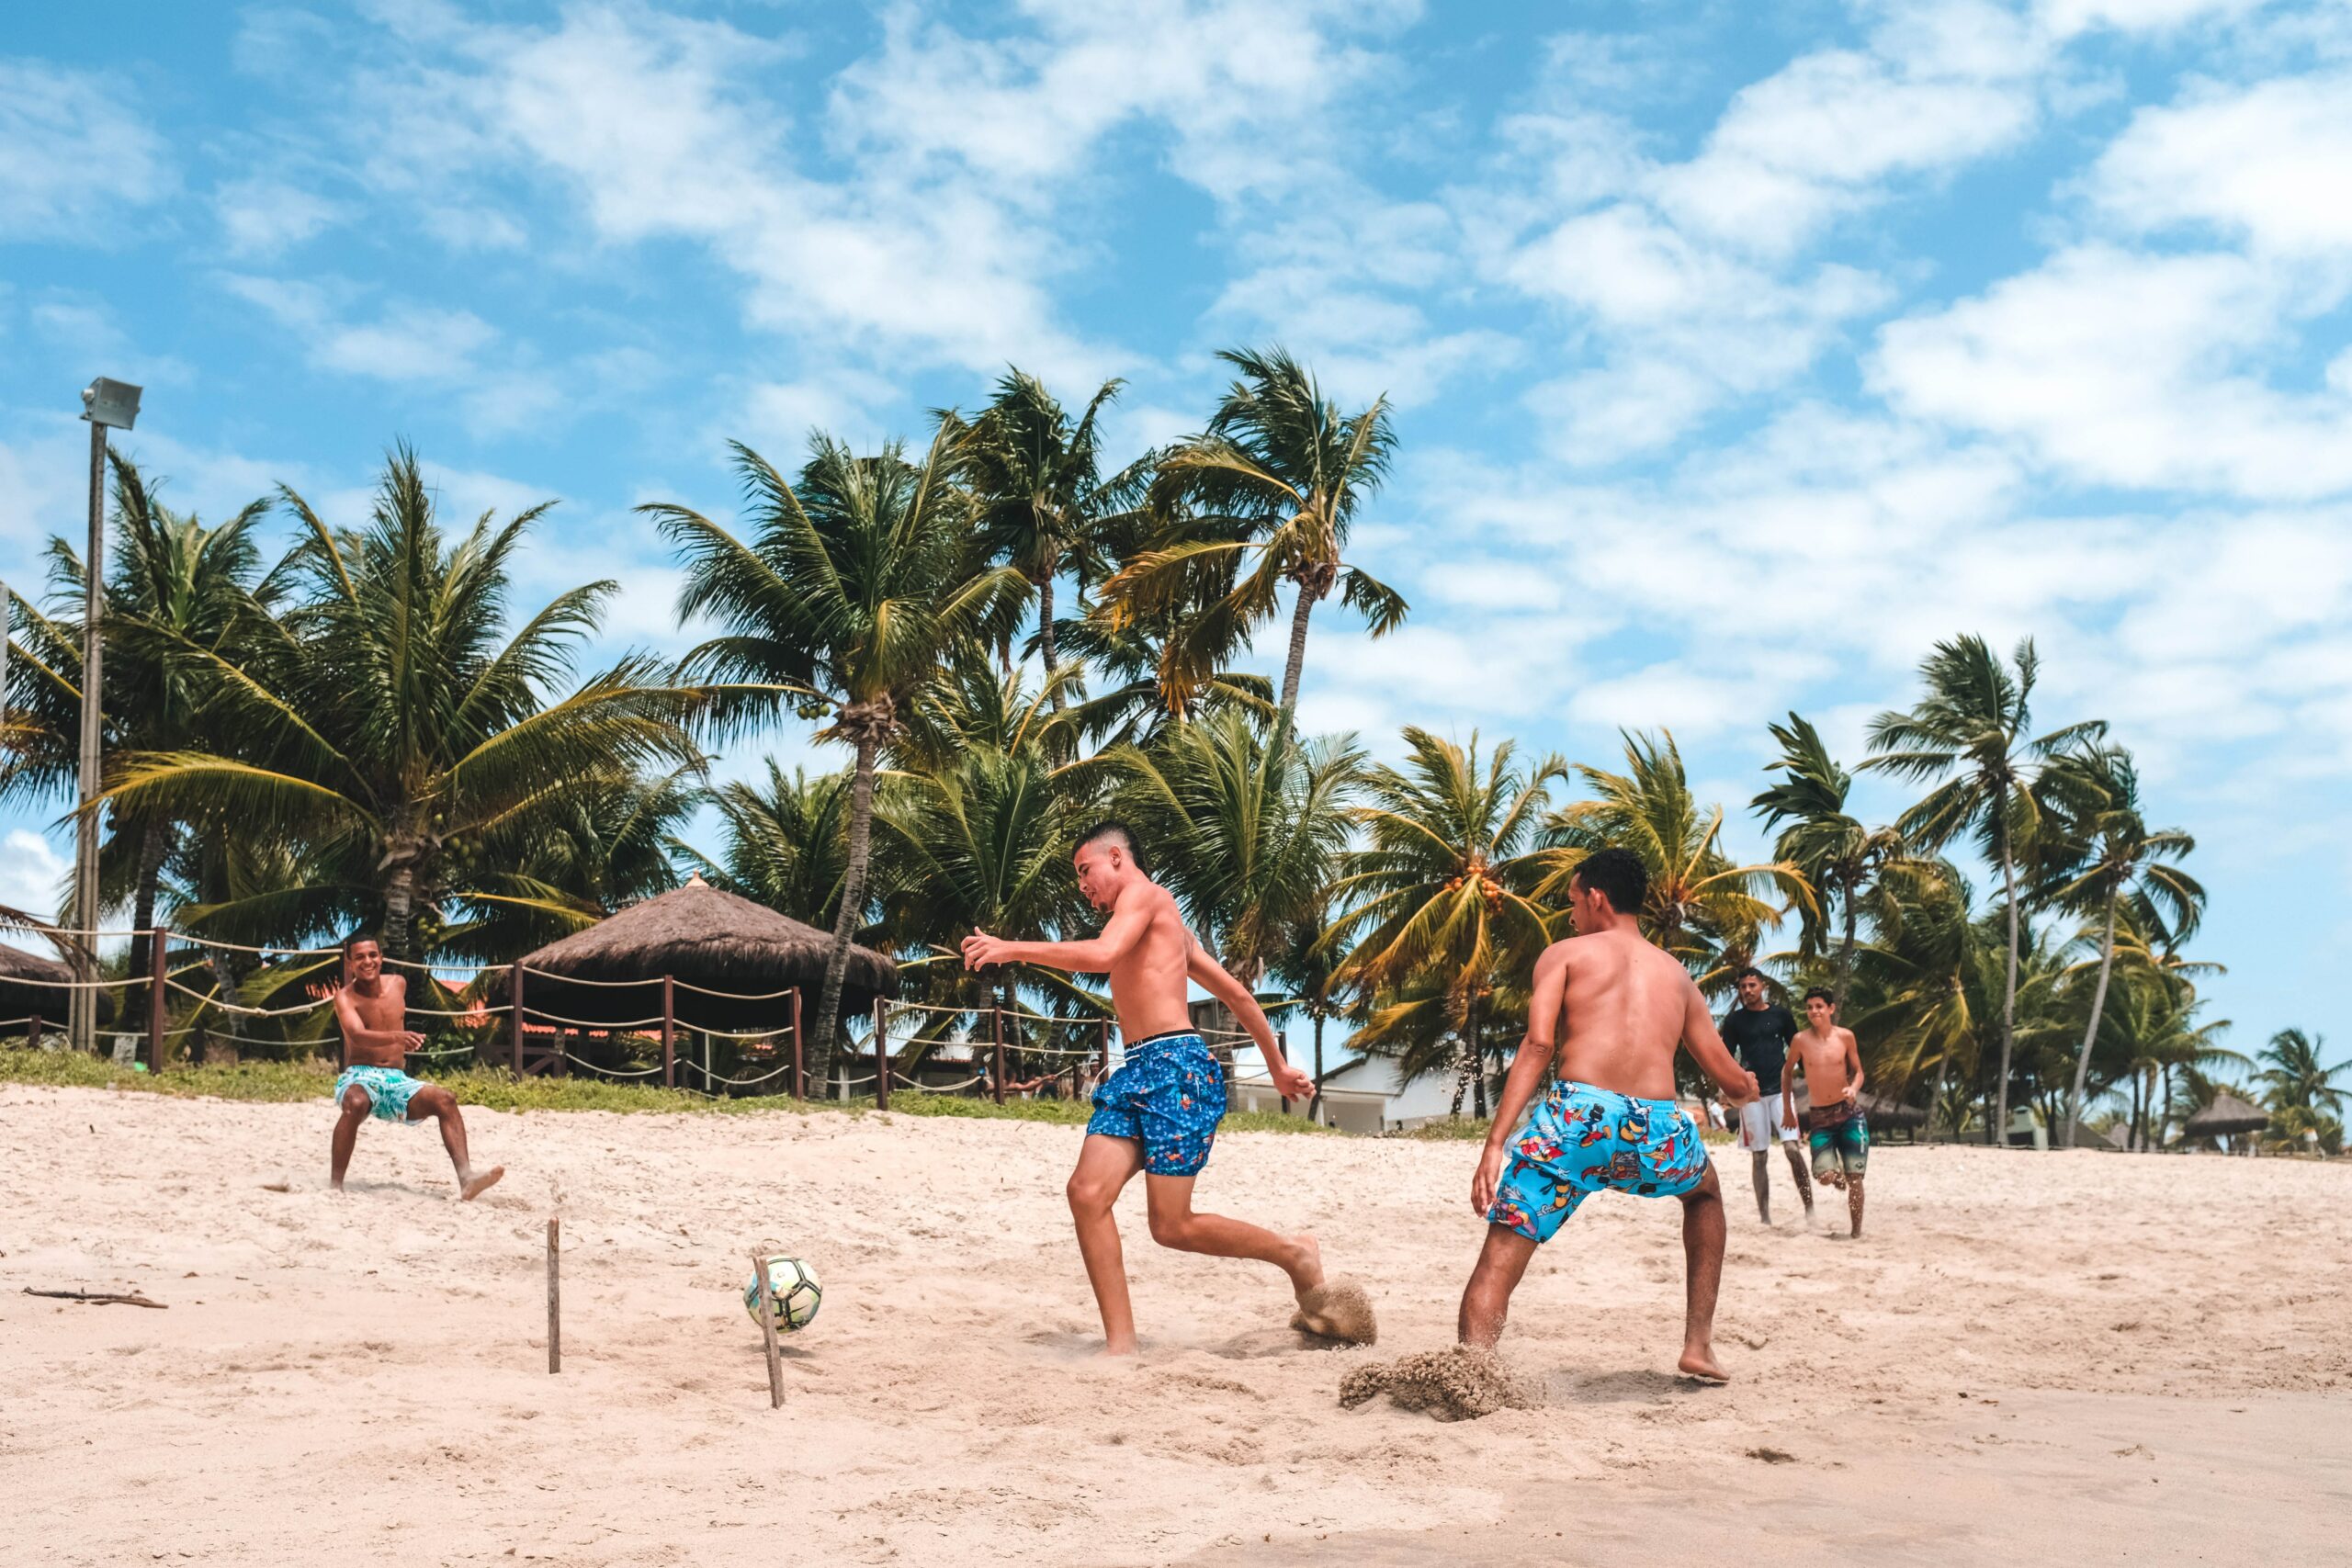 A group of men playing frisbee on the beach.